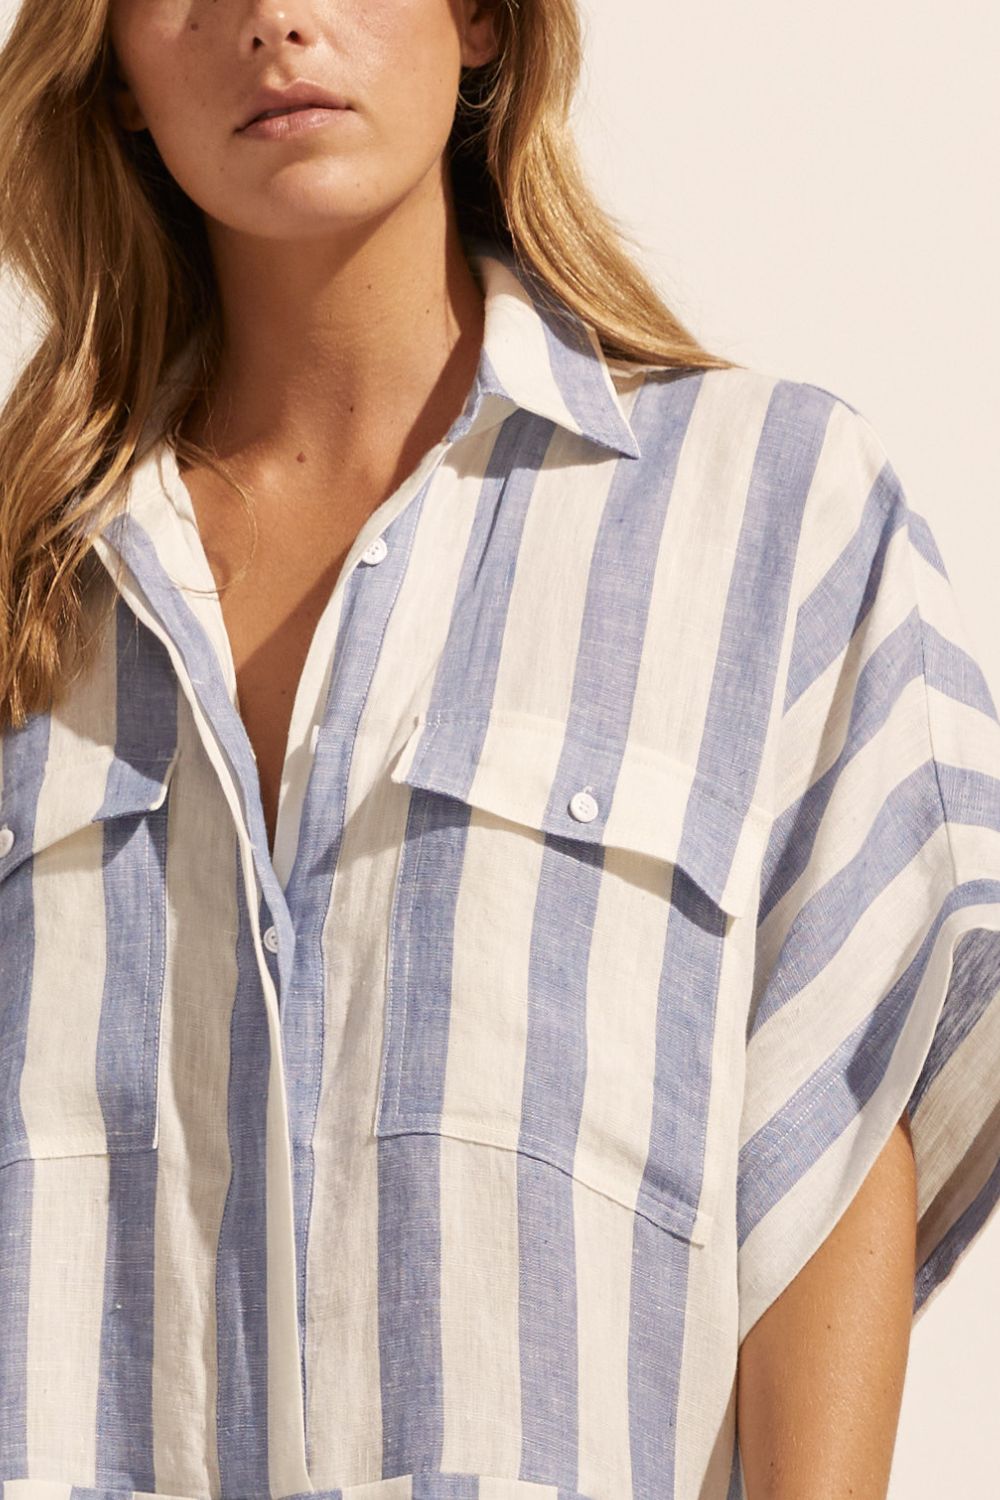 blue and white stripe, jumpsuit, button down collar, oversized patch pockets, close up view